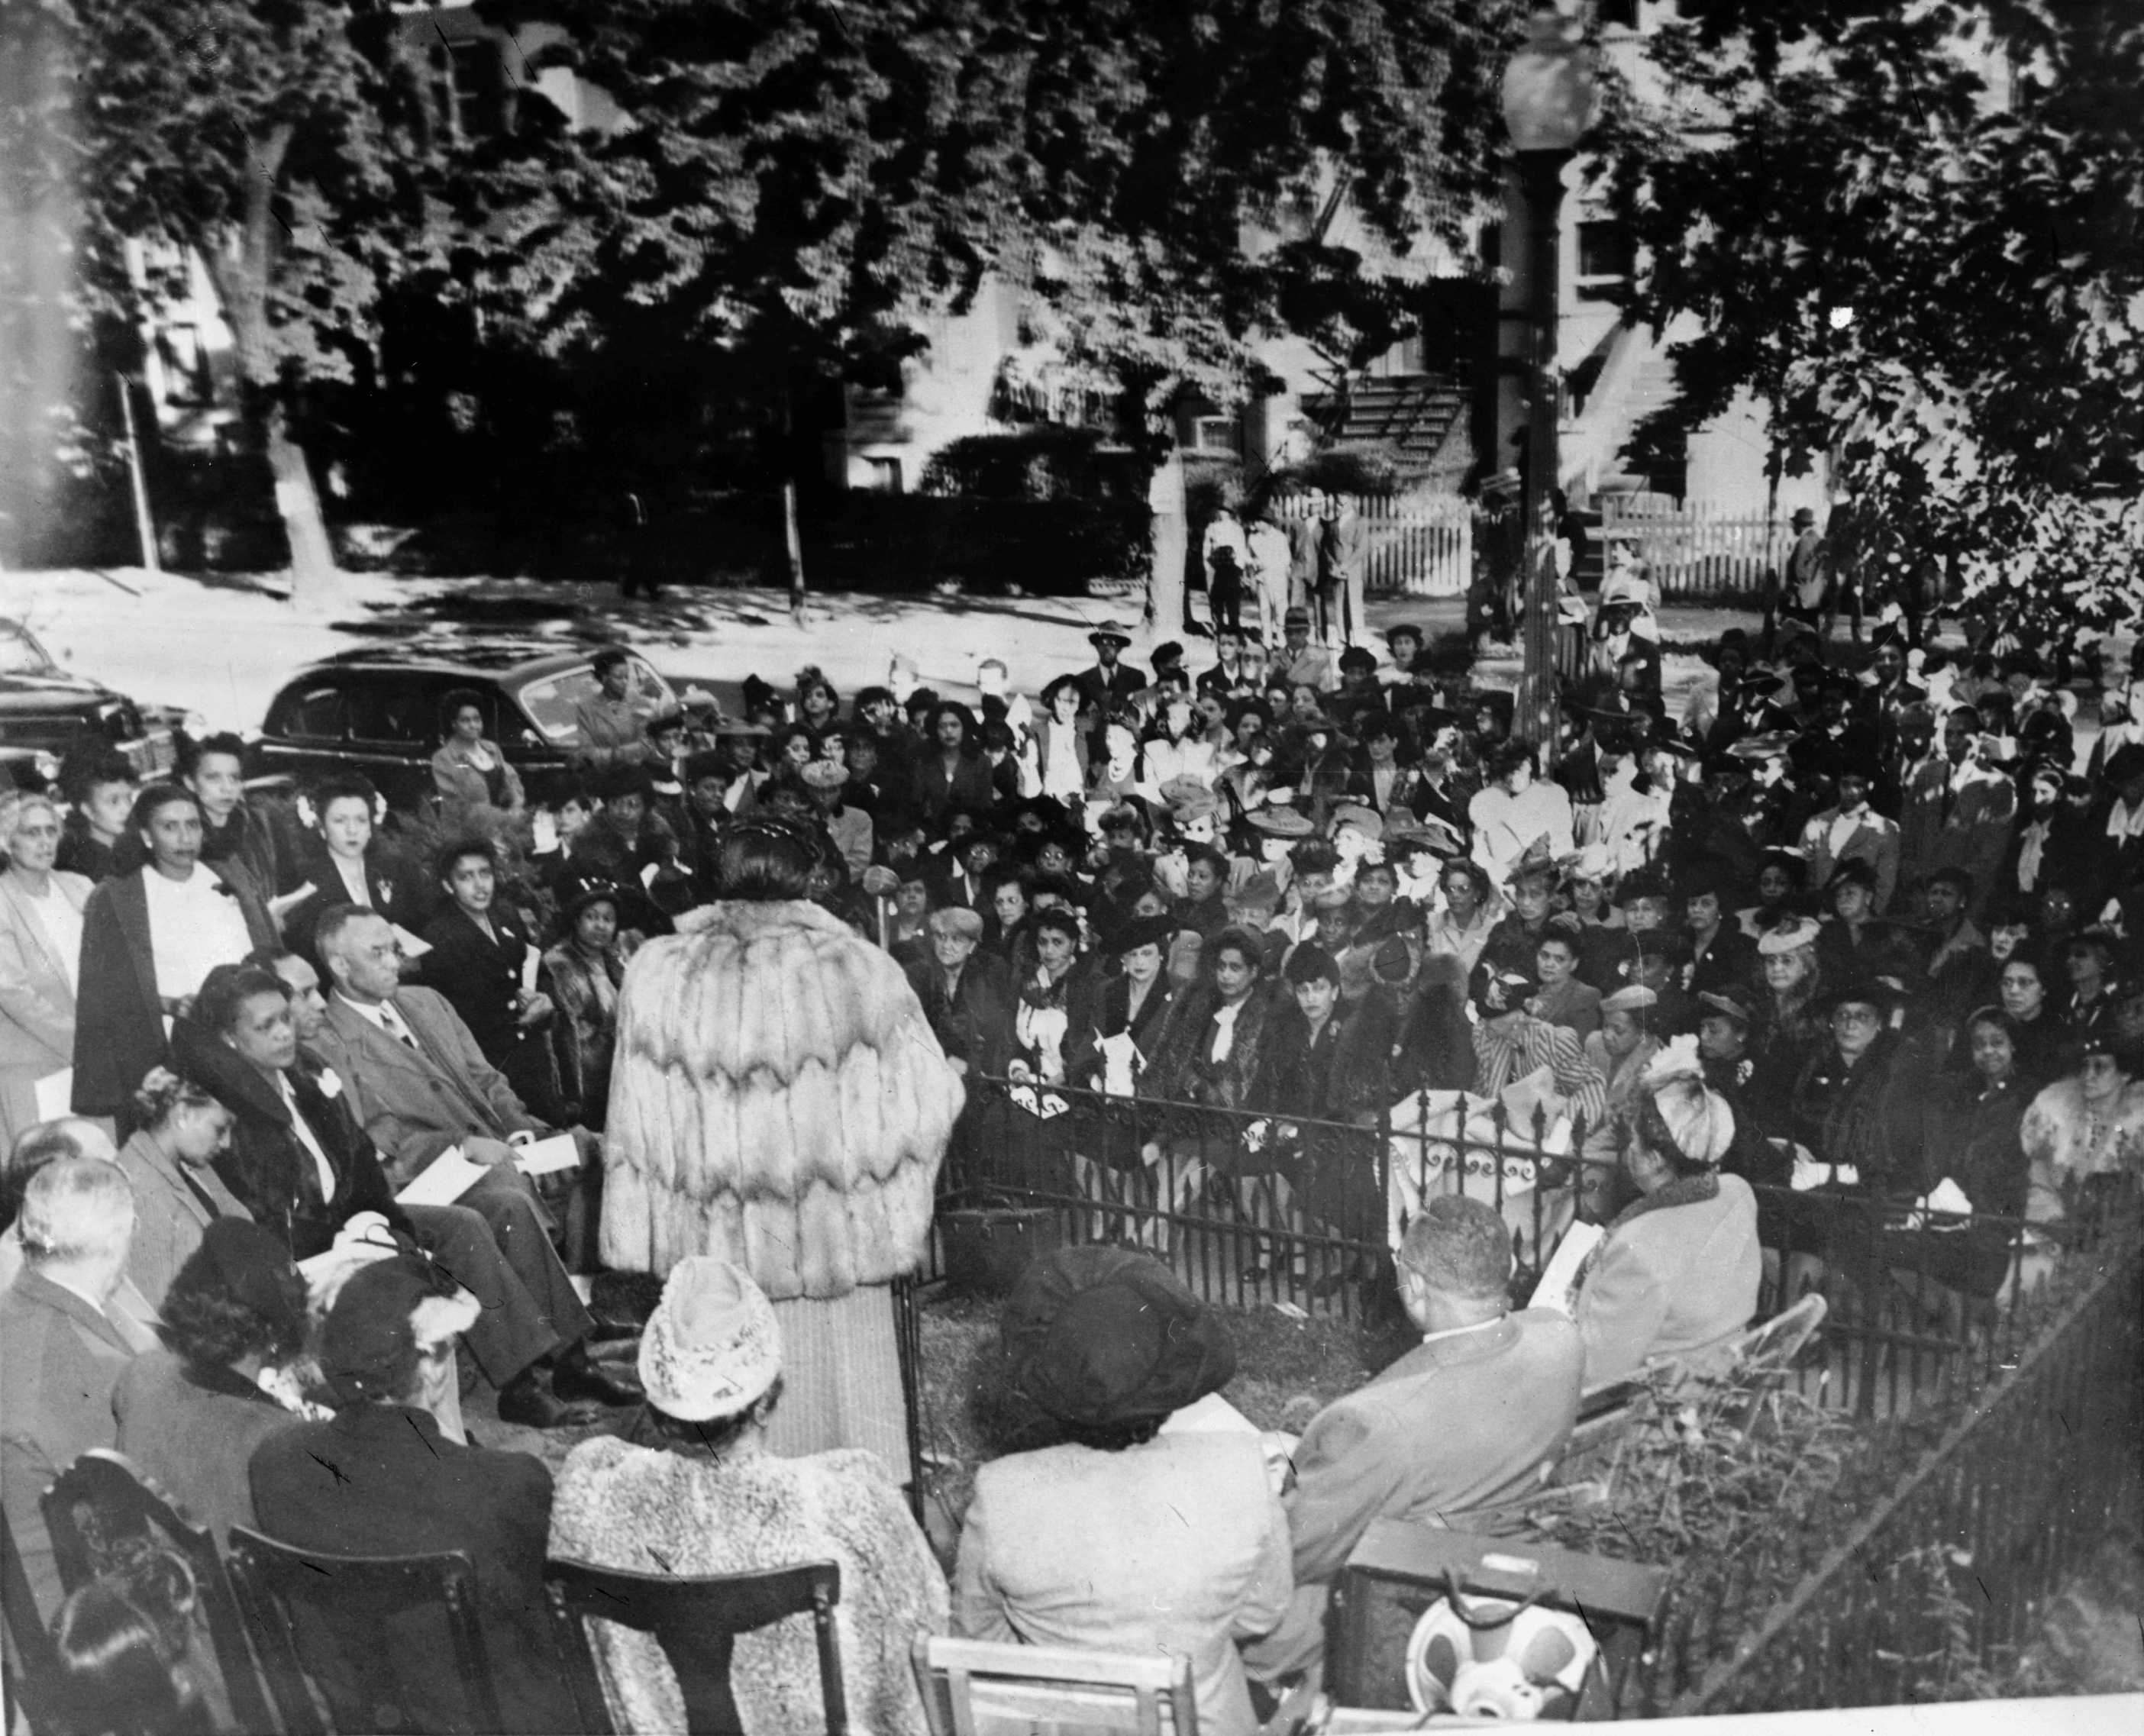 Photograph of Mary McLeod Bethune (with back to camera) speaking at the dedication of the National Council of Negro Women headquarters